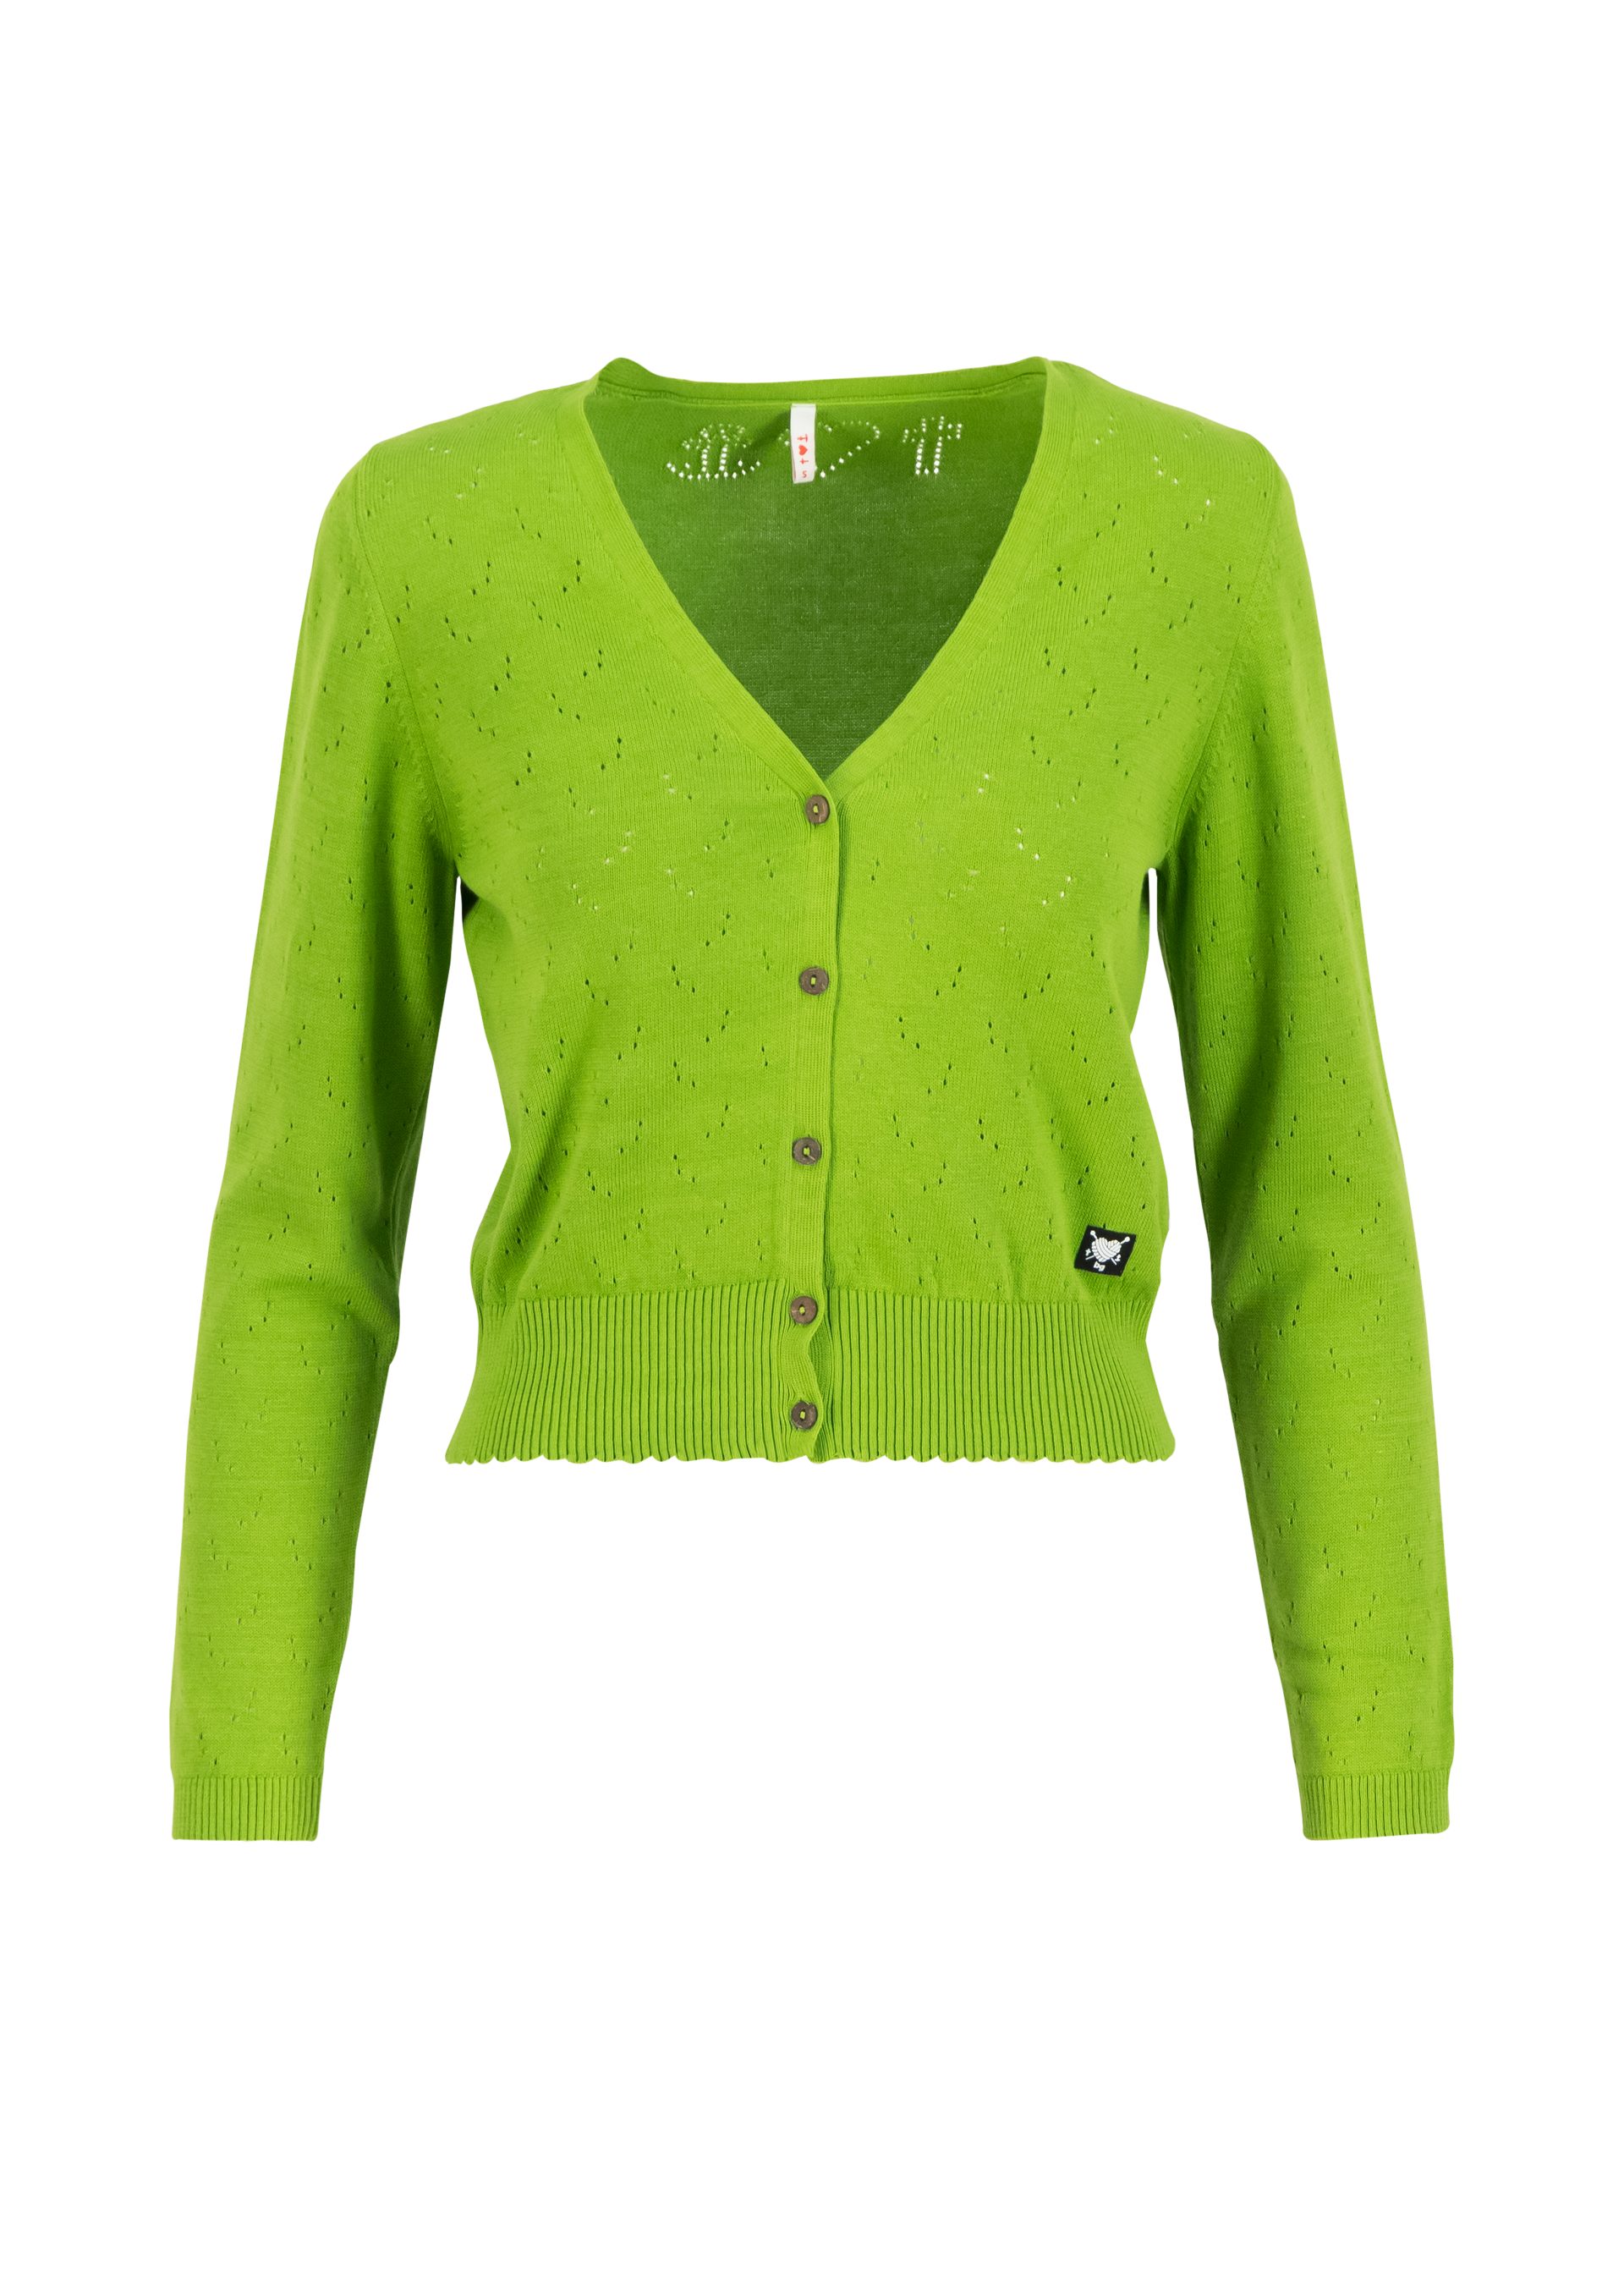 Blutsgeschwister Cardigan Save the World - stunningly green knit | Cardigans